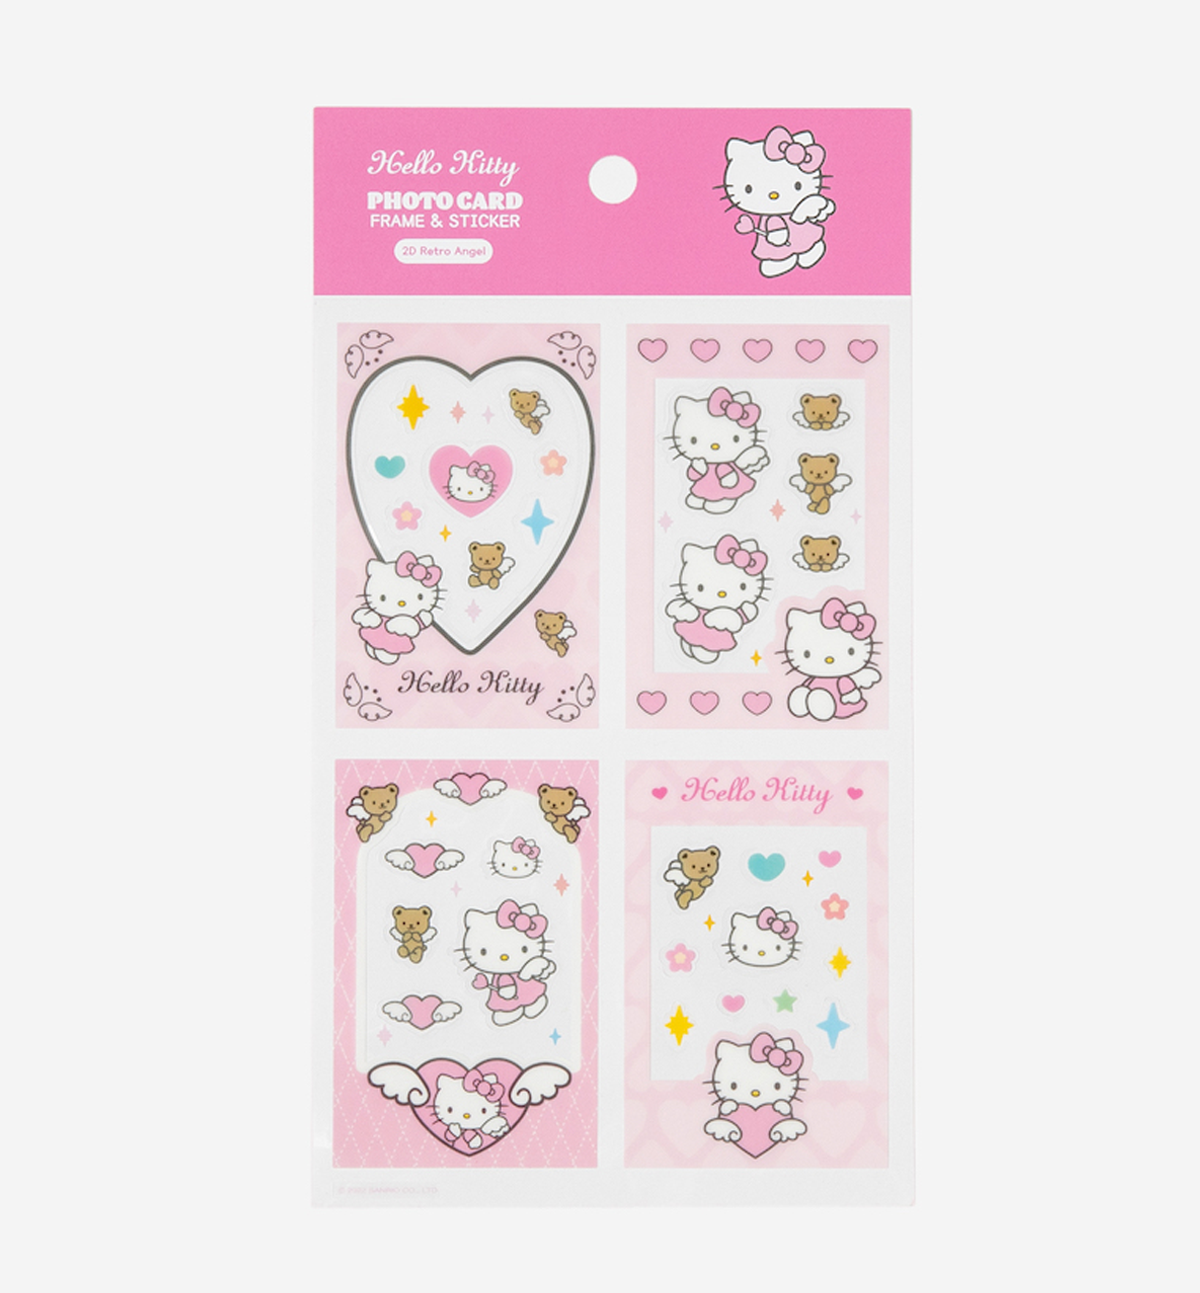 Hello Kitty Office Supplies: markers, white out tape, name tags